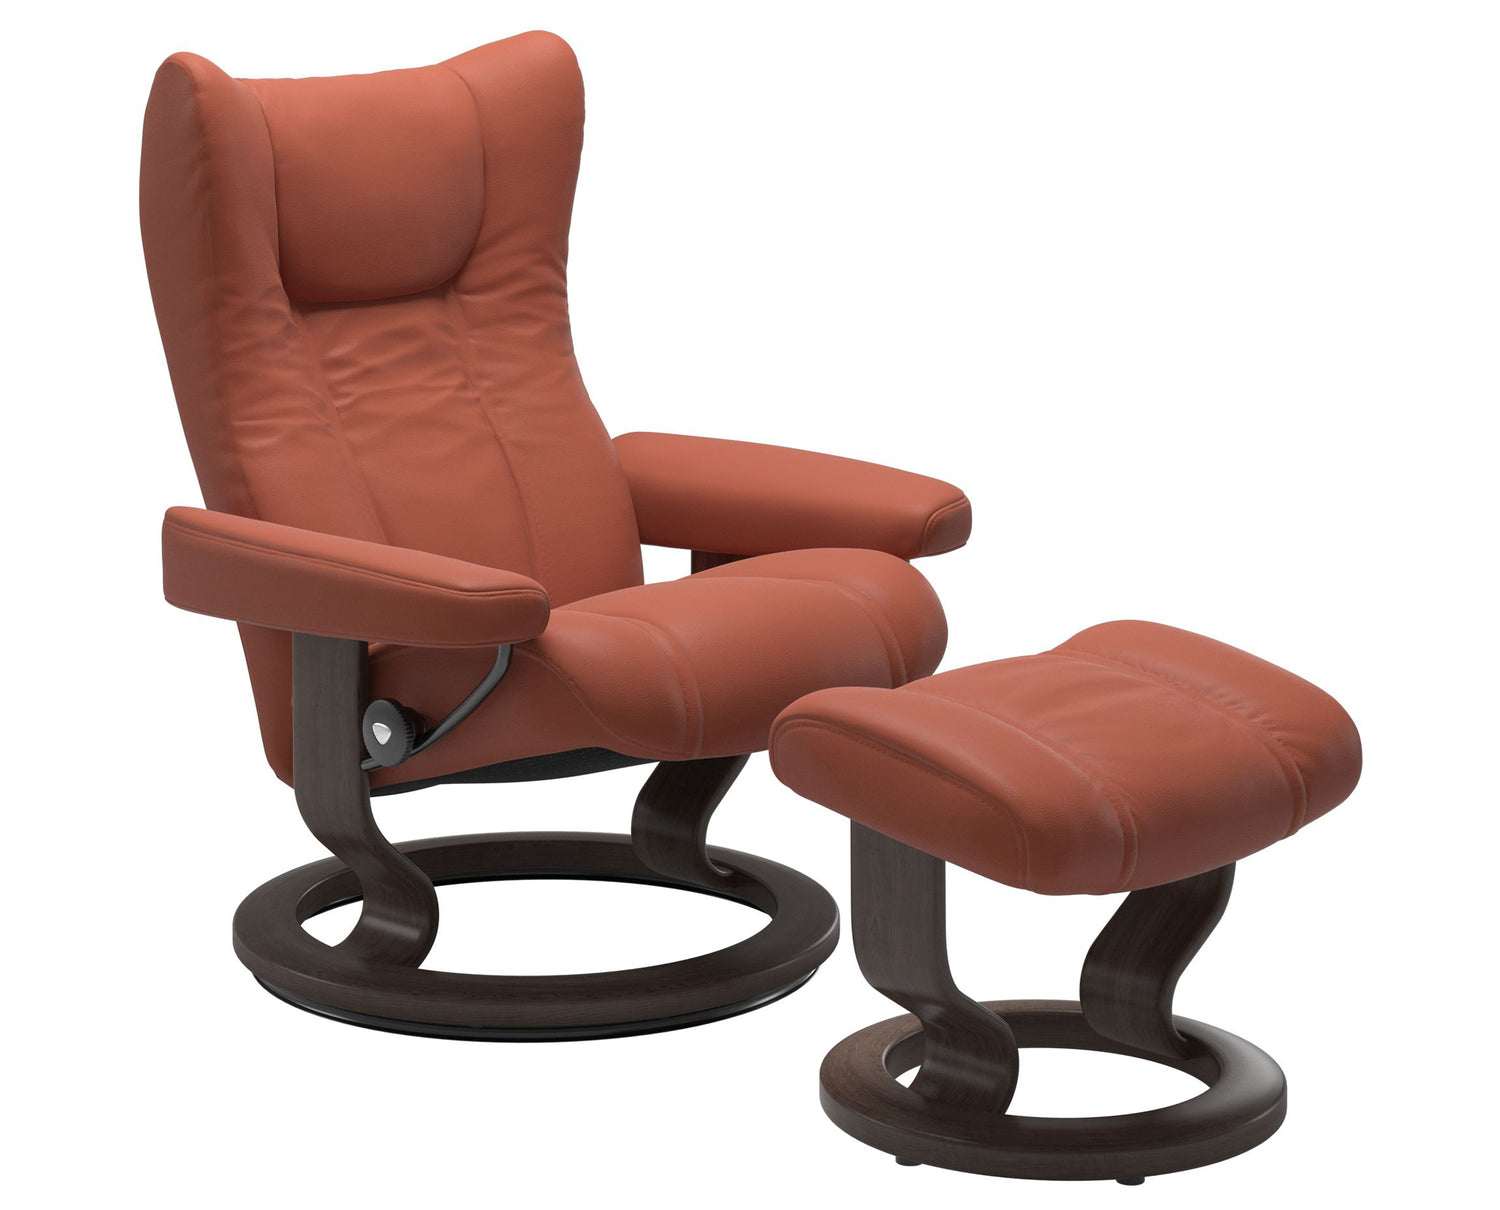 Paloma Leather Henna S/M/L & Wenge Base | Stressless Wing Classic Recliner | Valley Ridge Furniture